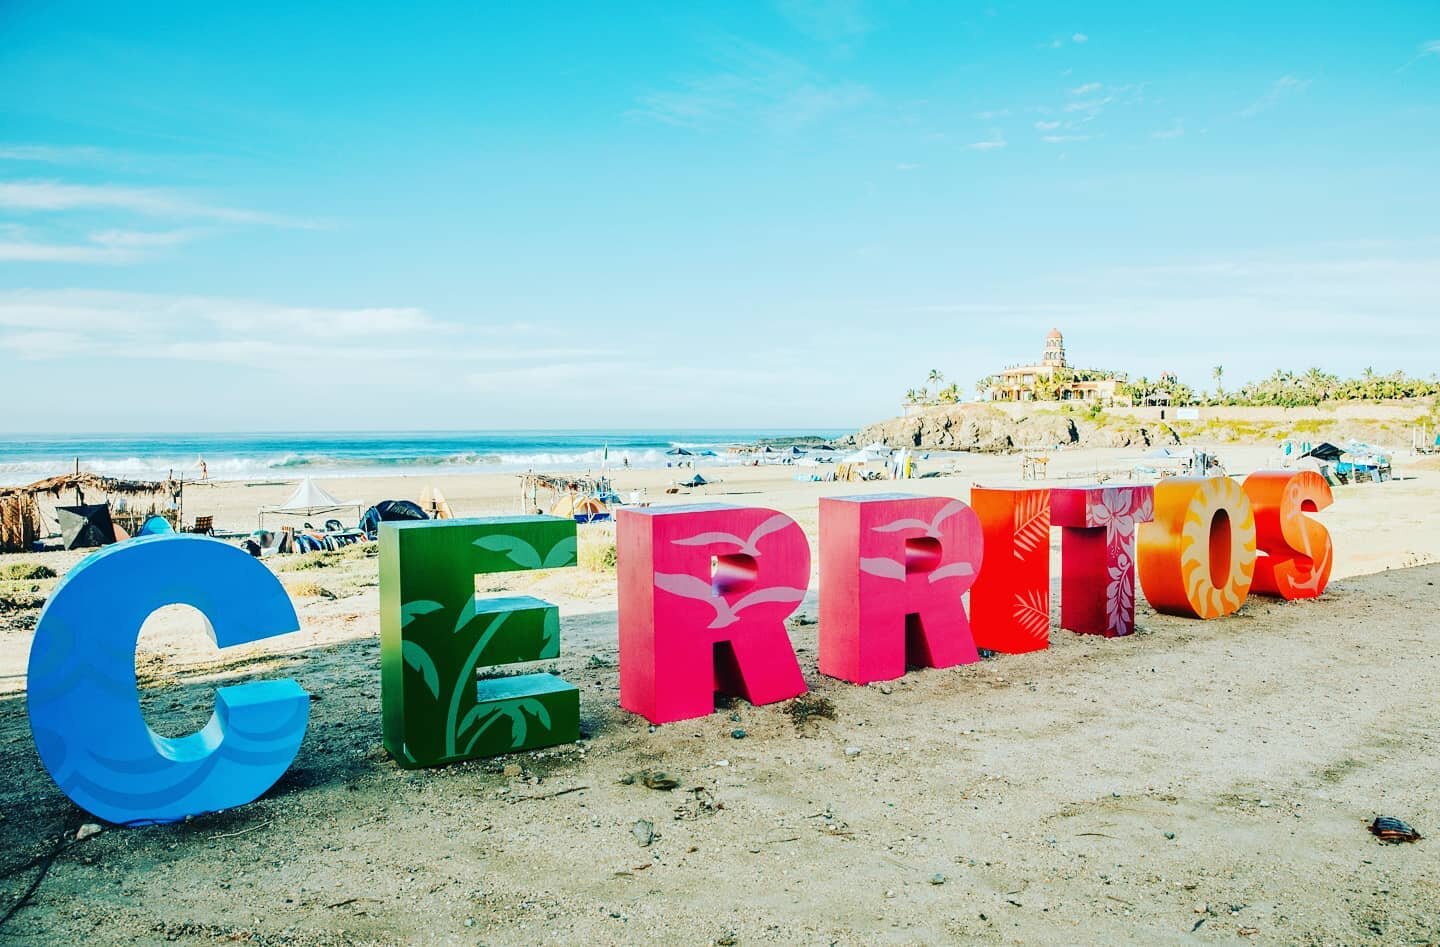 We were pretty excited when they added this postcard perfect signage to the beach just before our last visit. You can collect postcard memories to match all around the Baja with matching signs in Todos Santos, la Paz, Los Cabos and a few other day tr